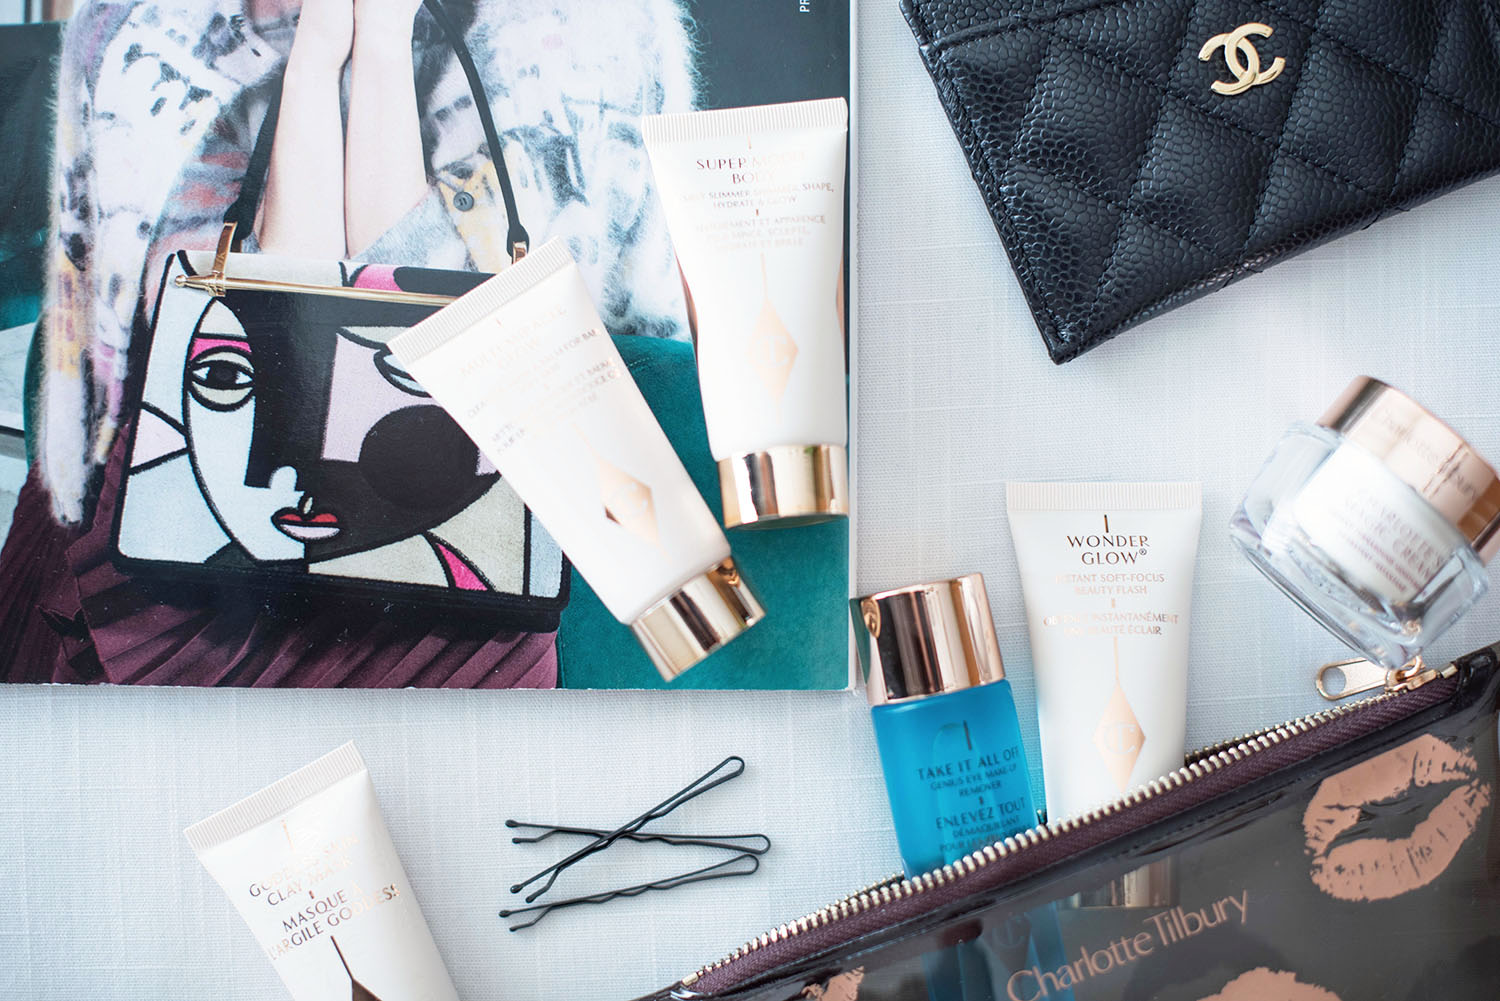 Products from the Charlotte Tilbury Gift of Red Carpet Skin set laid out with a copy of Vogue and a Chanel cardholder, captured by beauty blogger Cee Fardoe of Coco & Vera